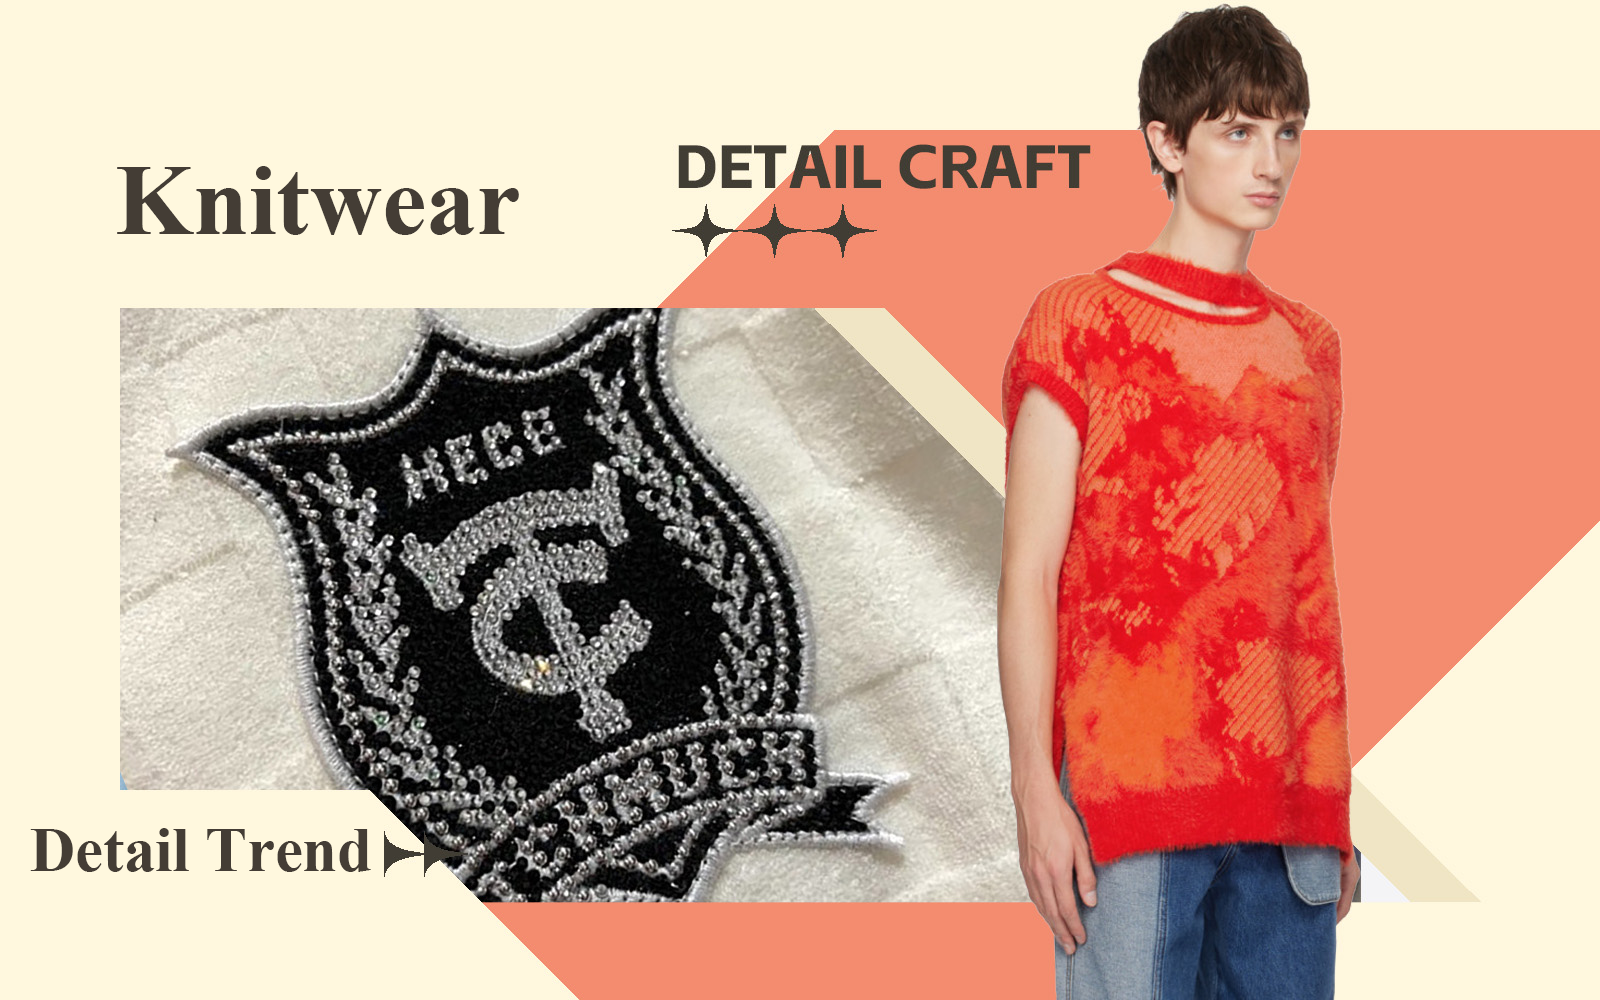 Highlighting Details -- The Detail & Craft Trend for Men's Knitwear